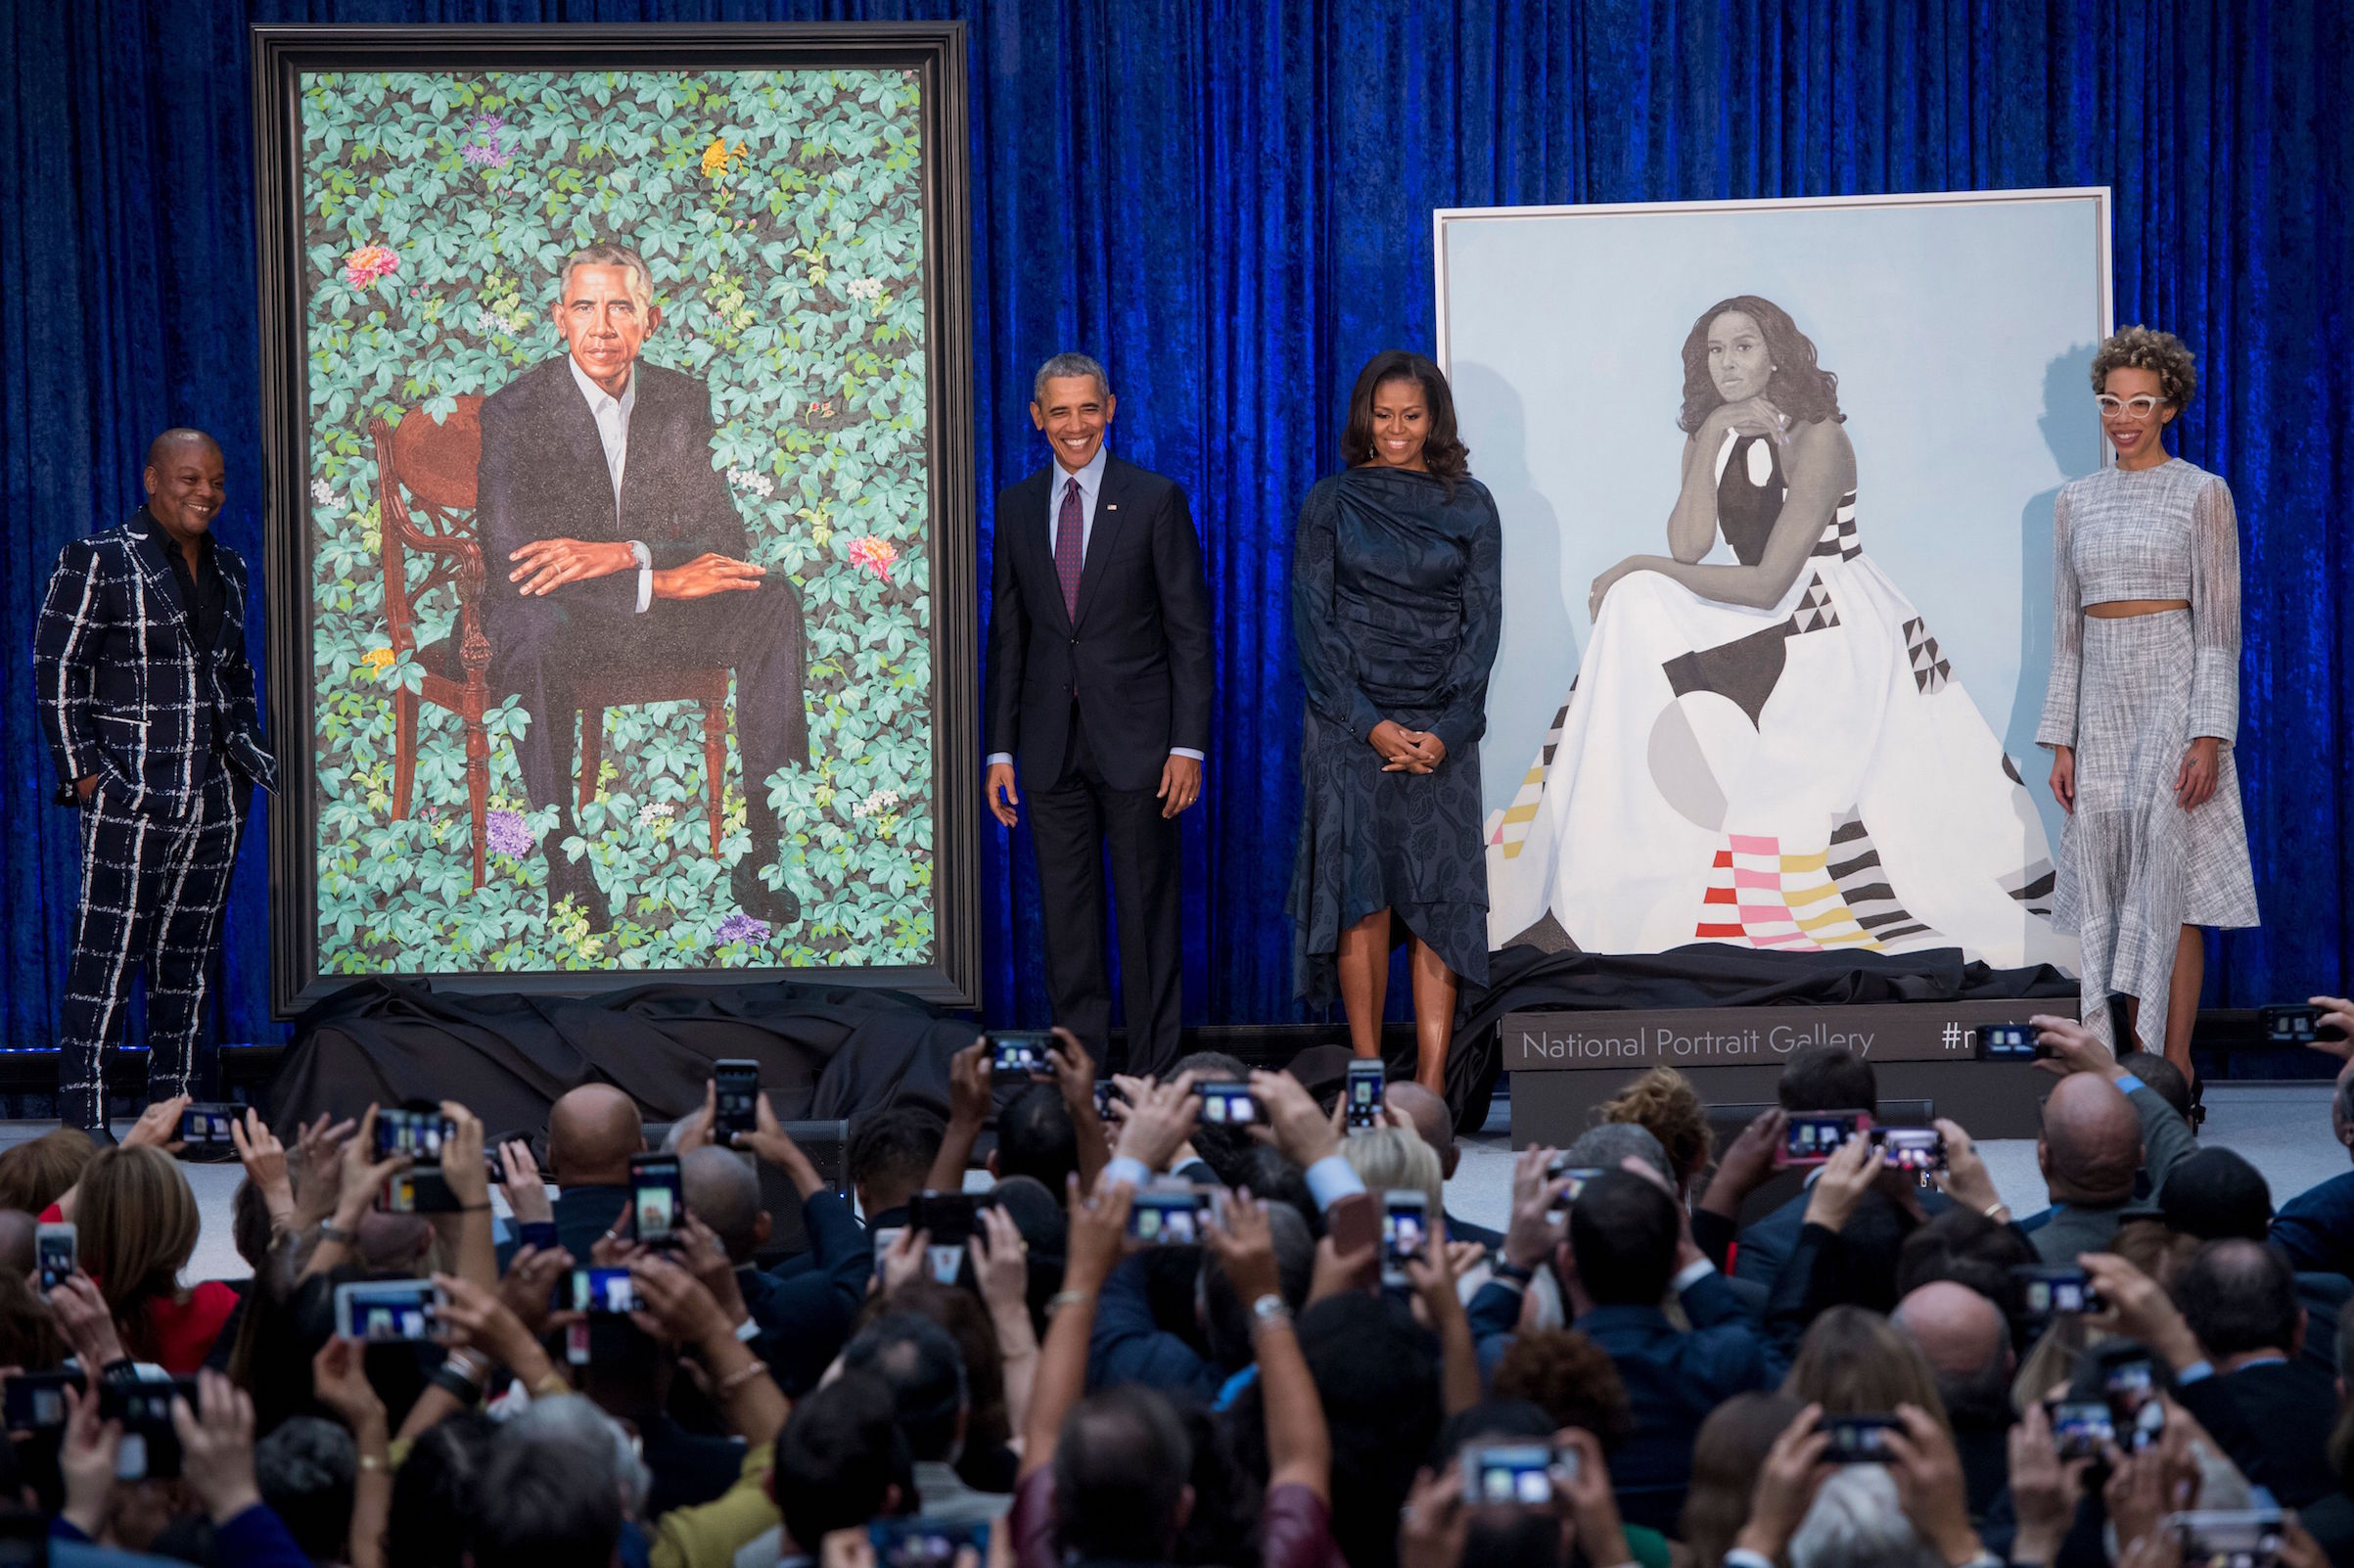 Former US President Barack Obama and First Lady Michelle Obama stand before their portraits and respective artists, Kehinde Wiley (L) and Amy Sherald (R), after an unveiling at the Smithsonian's National Portrait Gallery in Washington, D.C., on Feb. 12, 2018. (Saul Loeb—AFP/Getty Images)